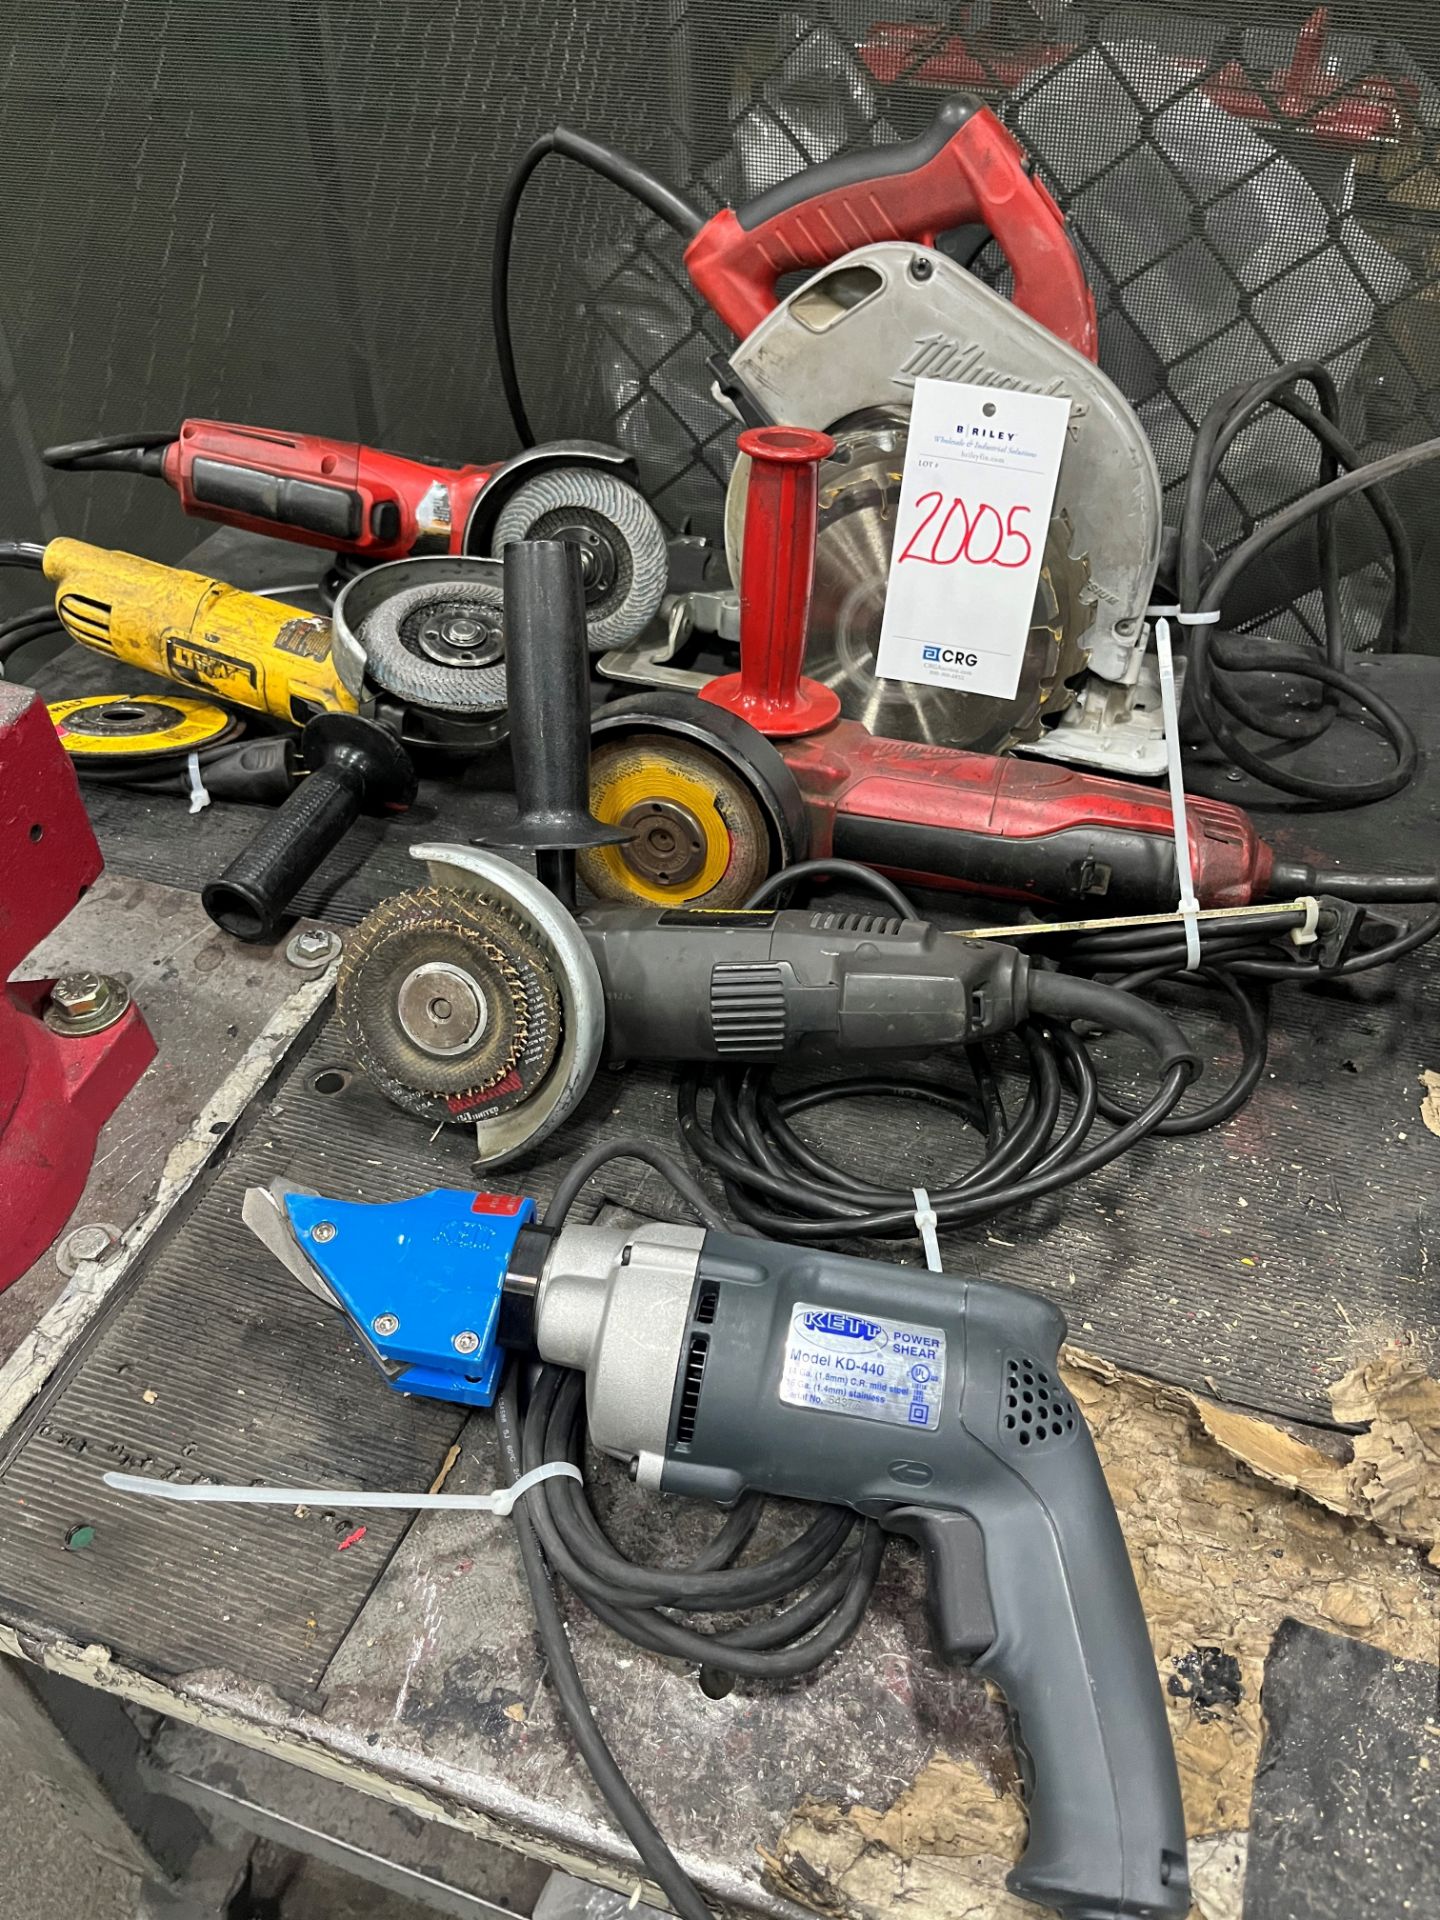 Assortment of electric power tools